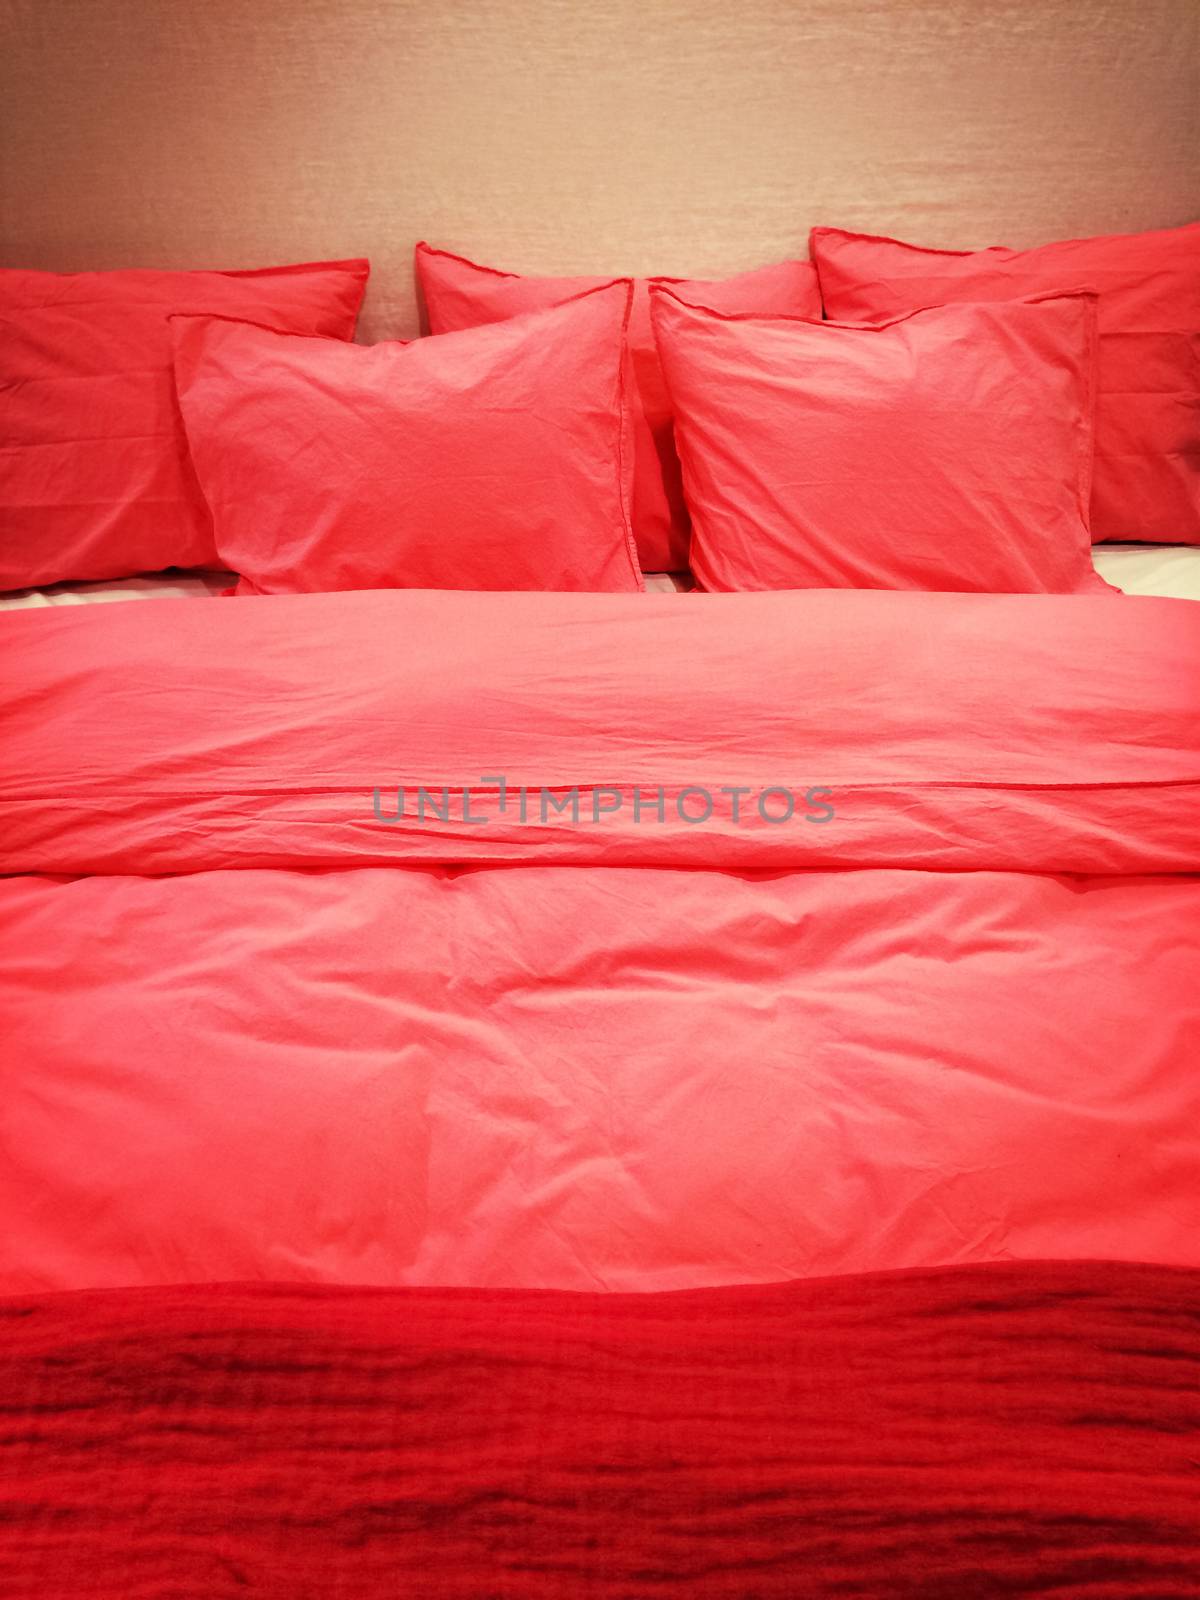 Bed with red romantic bed linen by anikasalsera